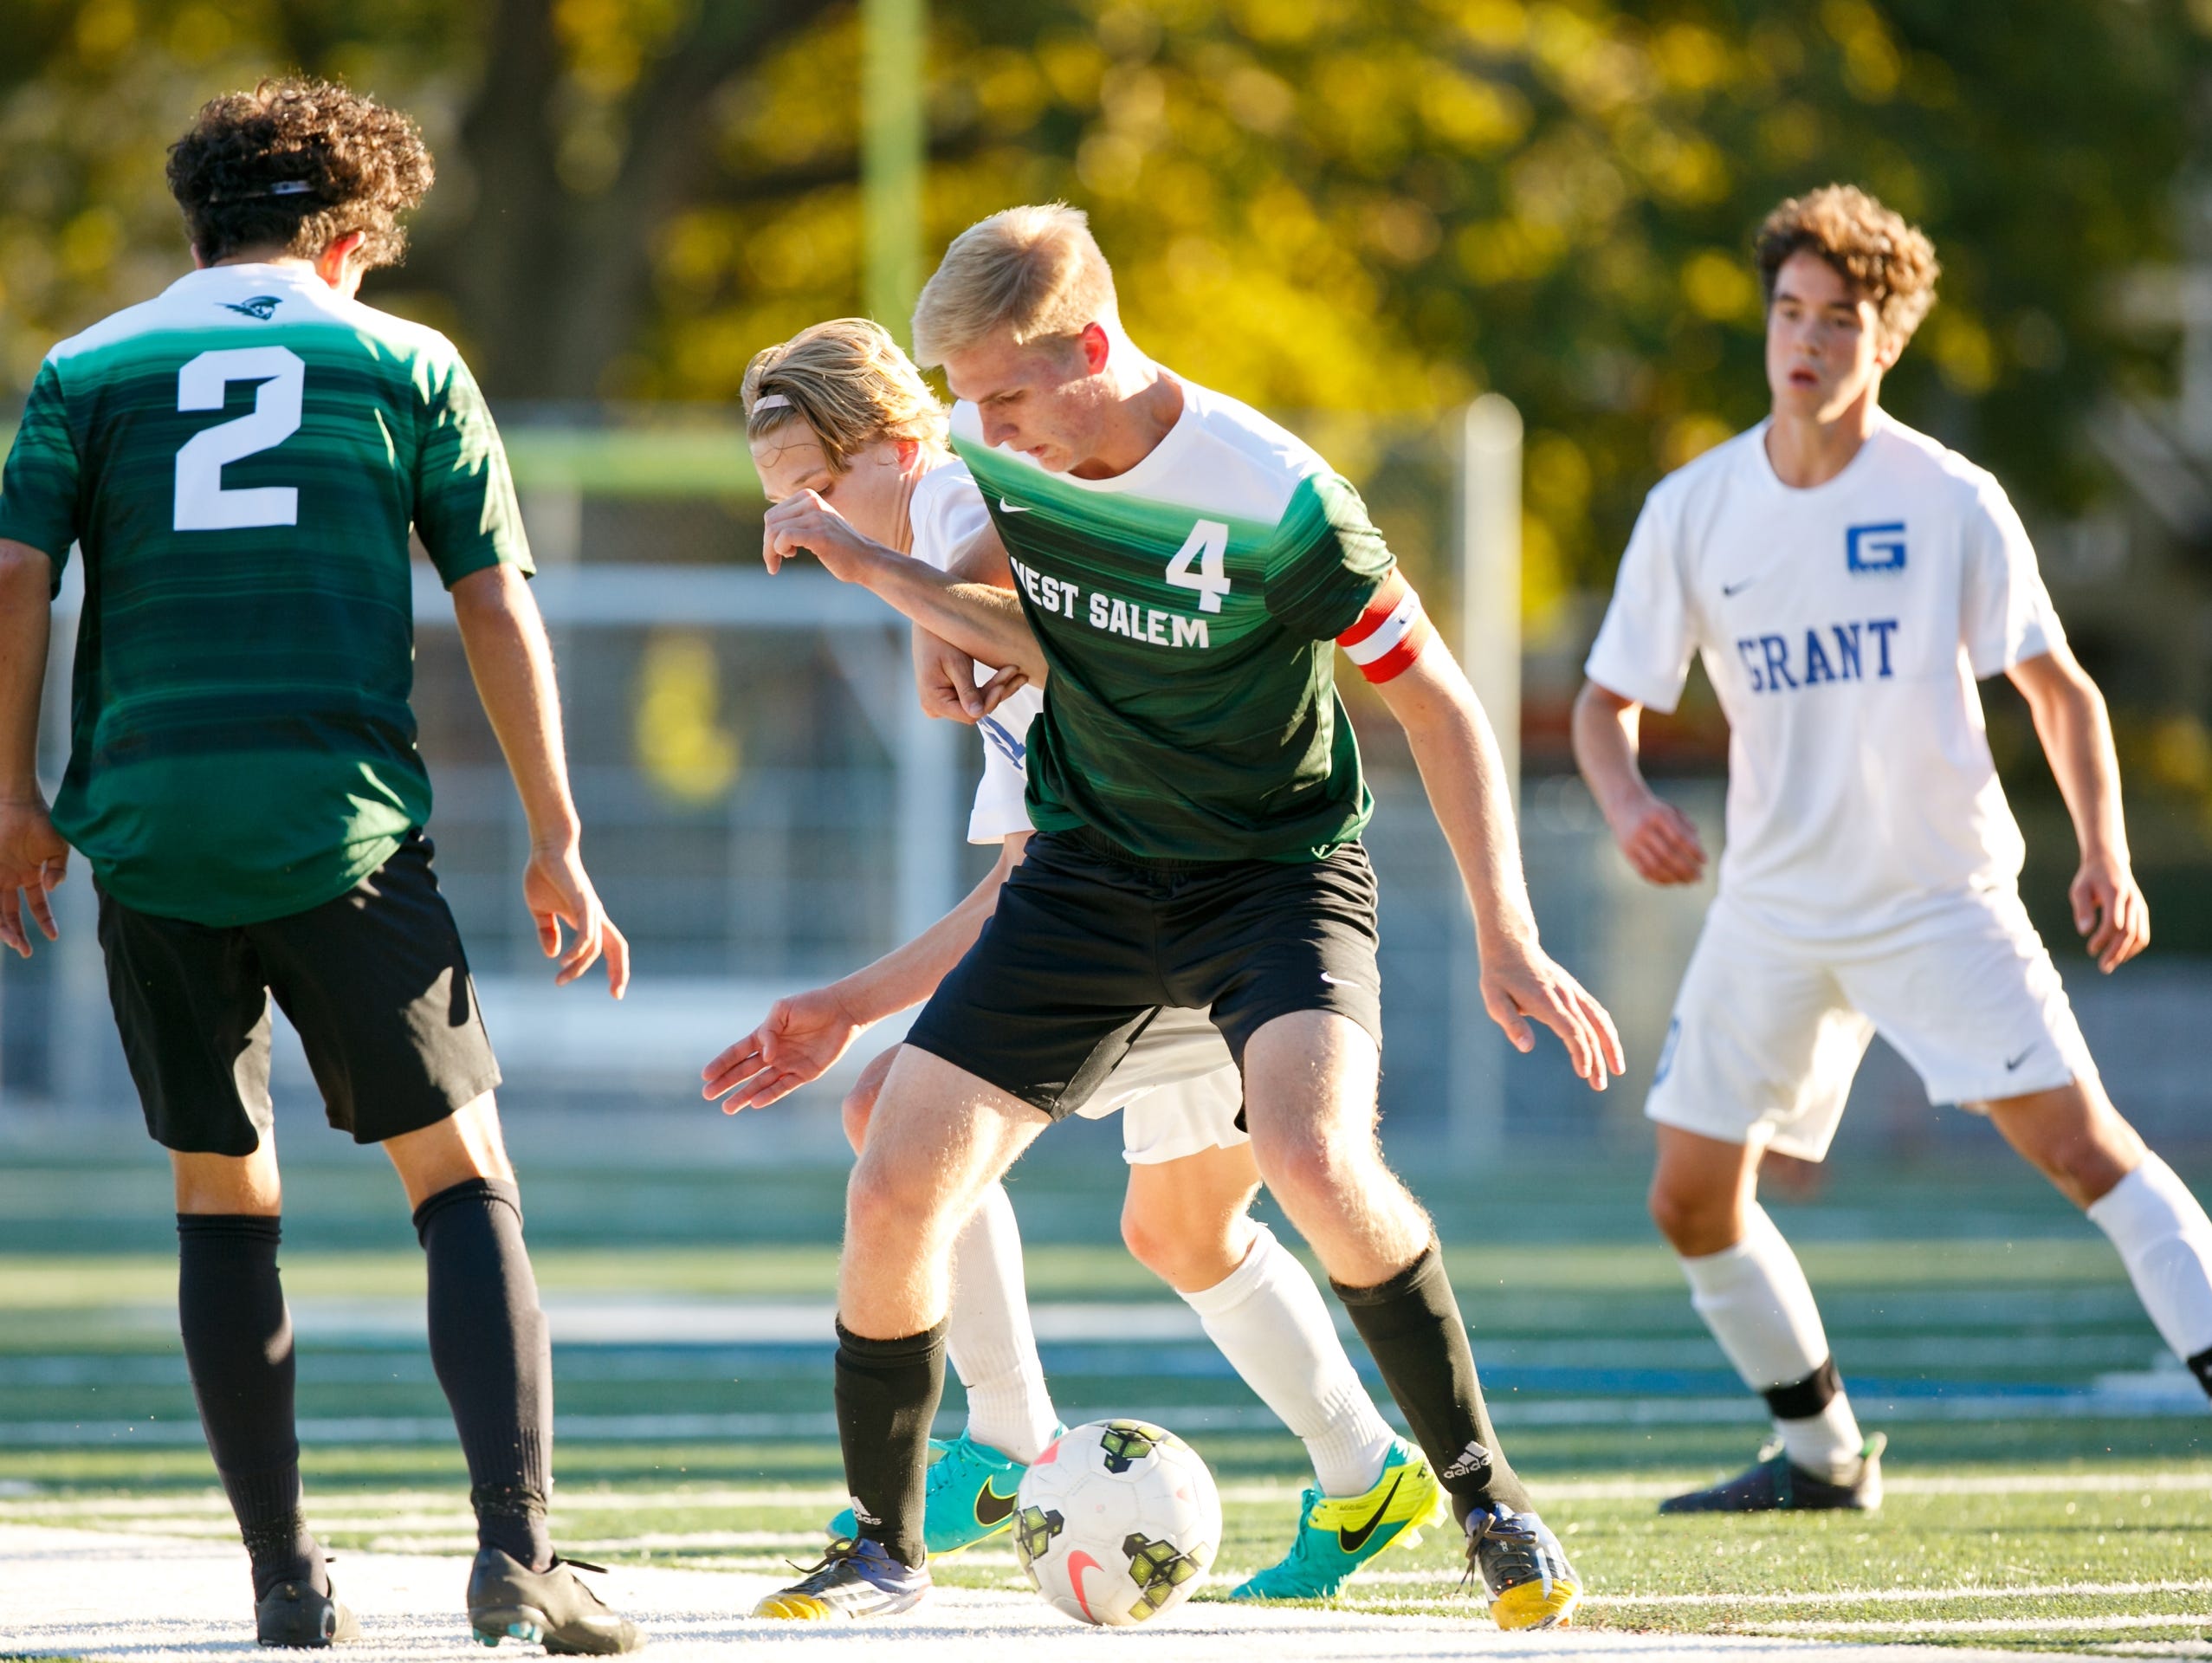 West Salem's Max Shaw (4) fights for control of the ball in a game against Grant High School on Tuesday, Sept. 13, 2016, in Portland, Ore. The West Salem Titans tied 1-1 with Grant.